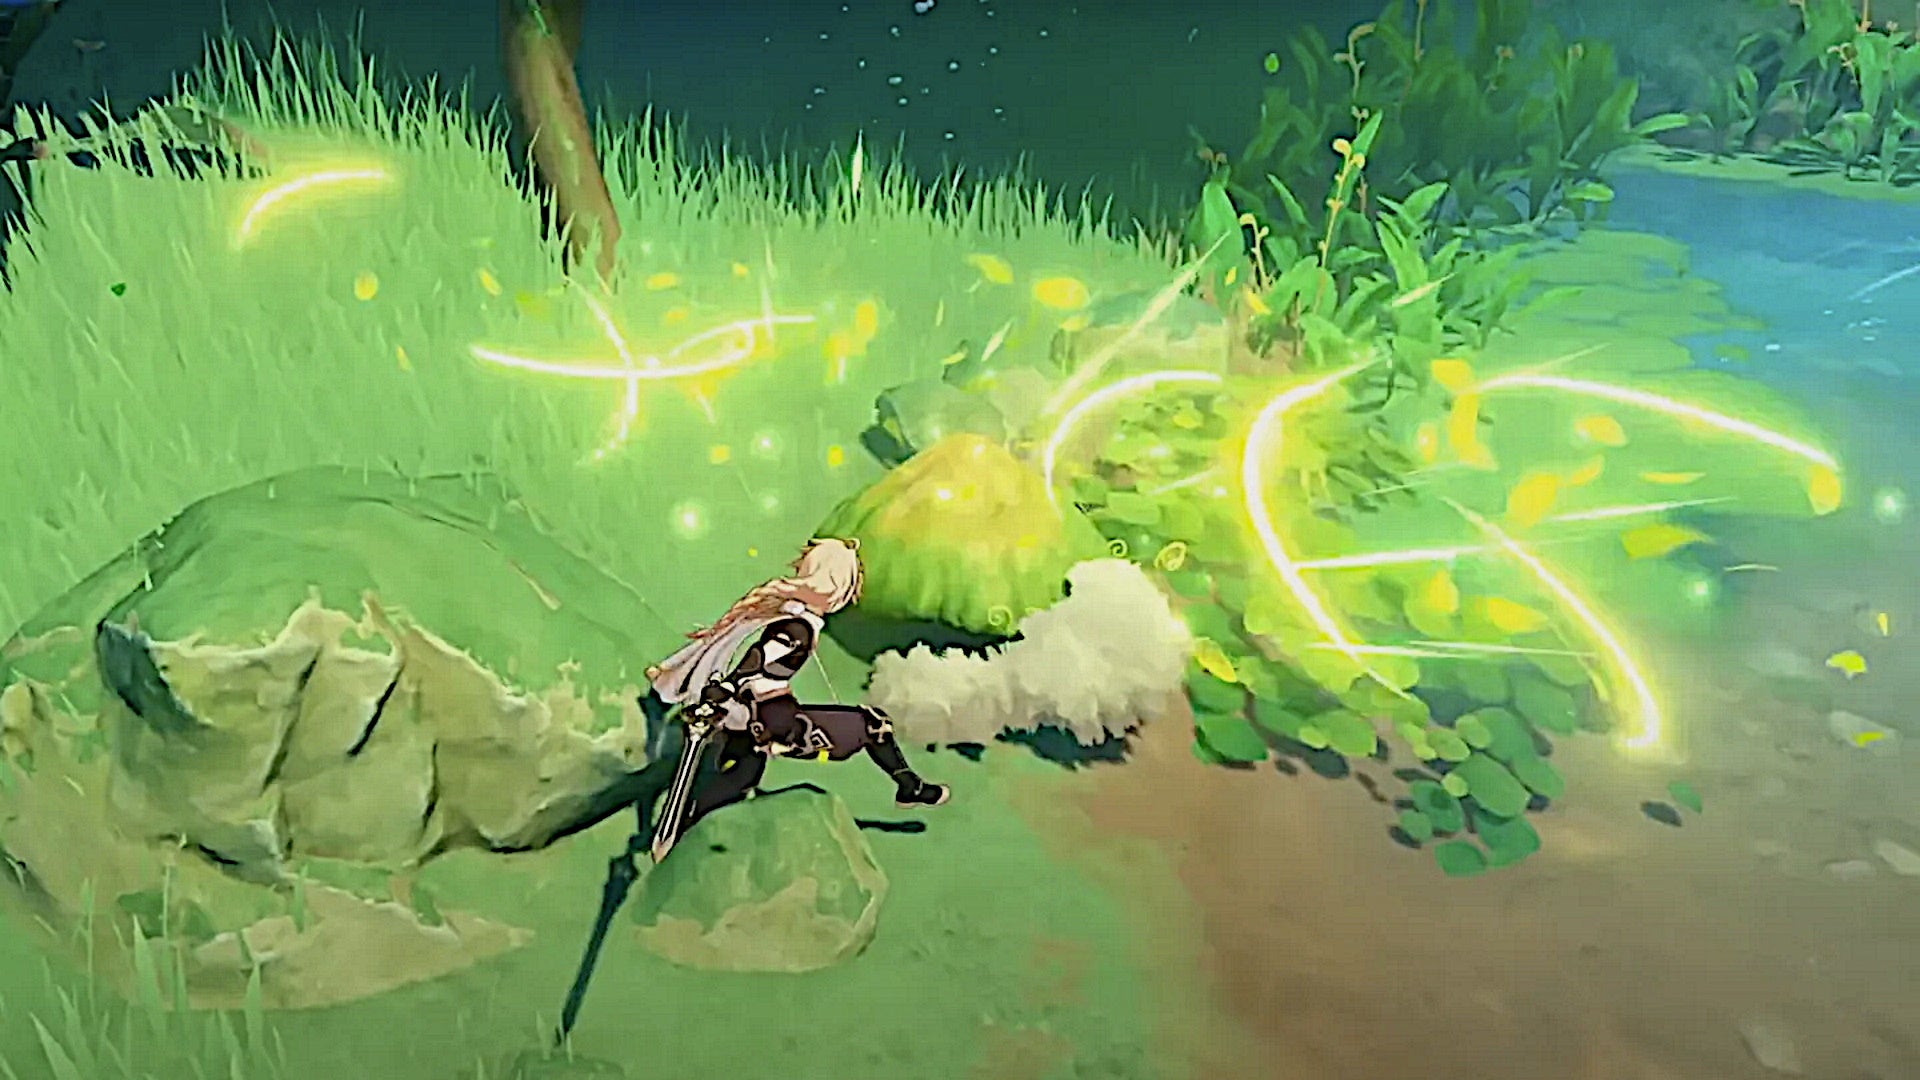 Genshin Impact Dendro: A young man emits leaf blades from a sword and attacks a walking mushroom